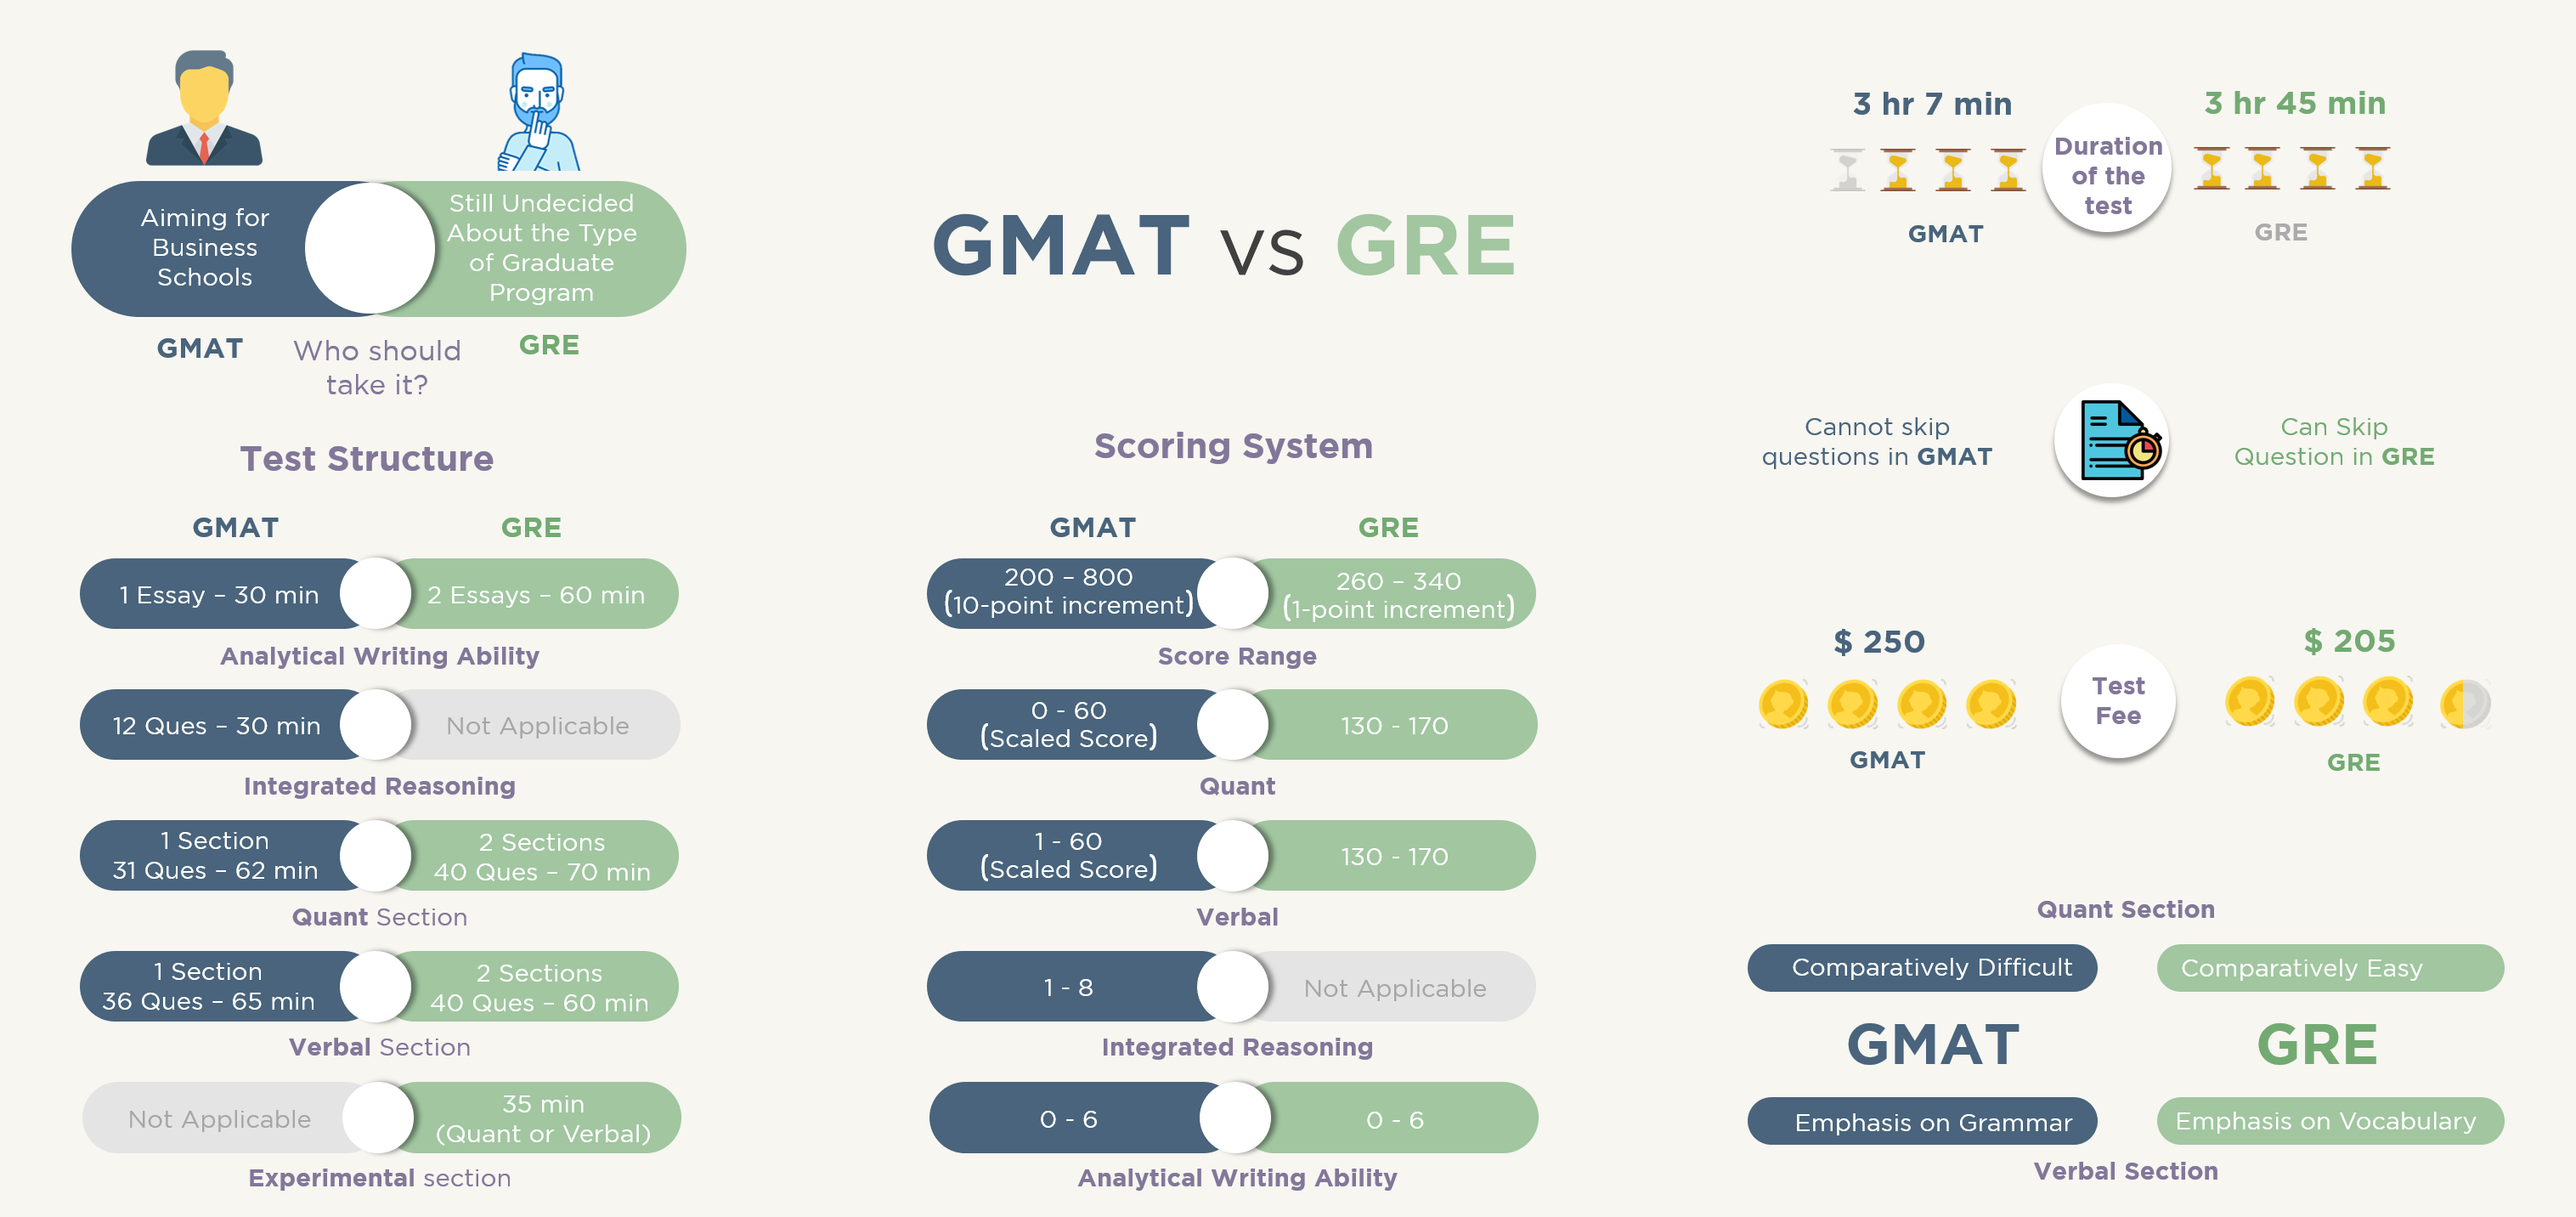 GMAT vs. GRE- What are the key differences between GMAT and GRE?